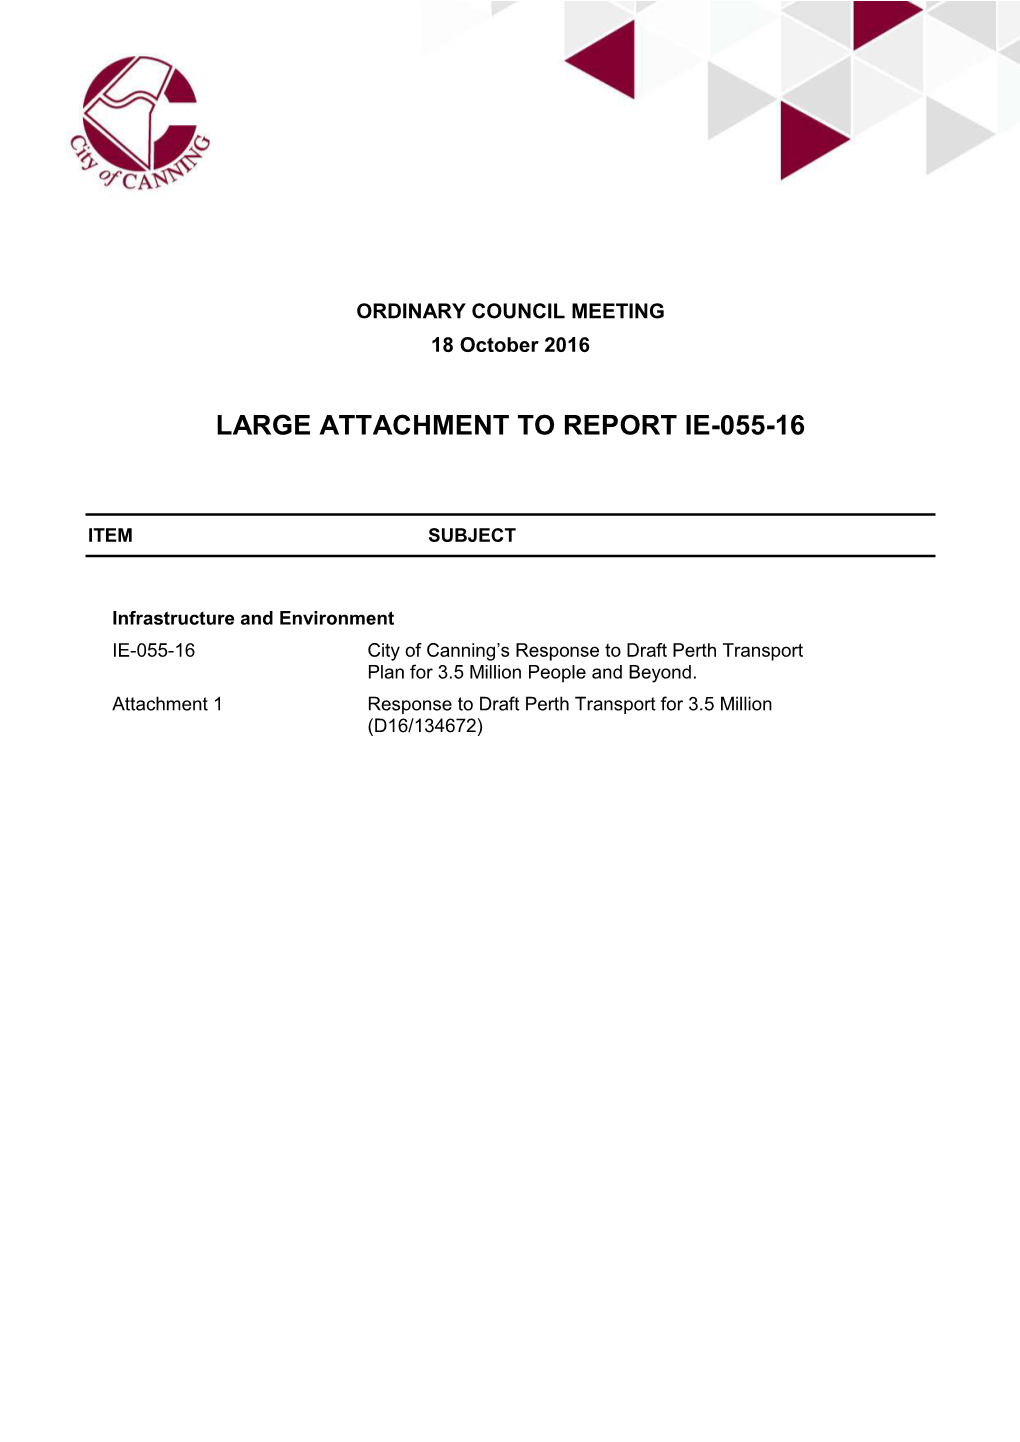 Large Attachment to Report Ie-055-16